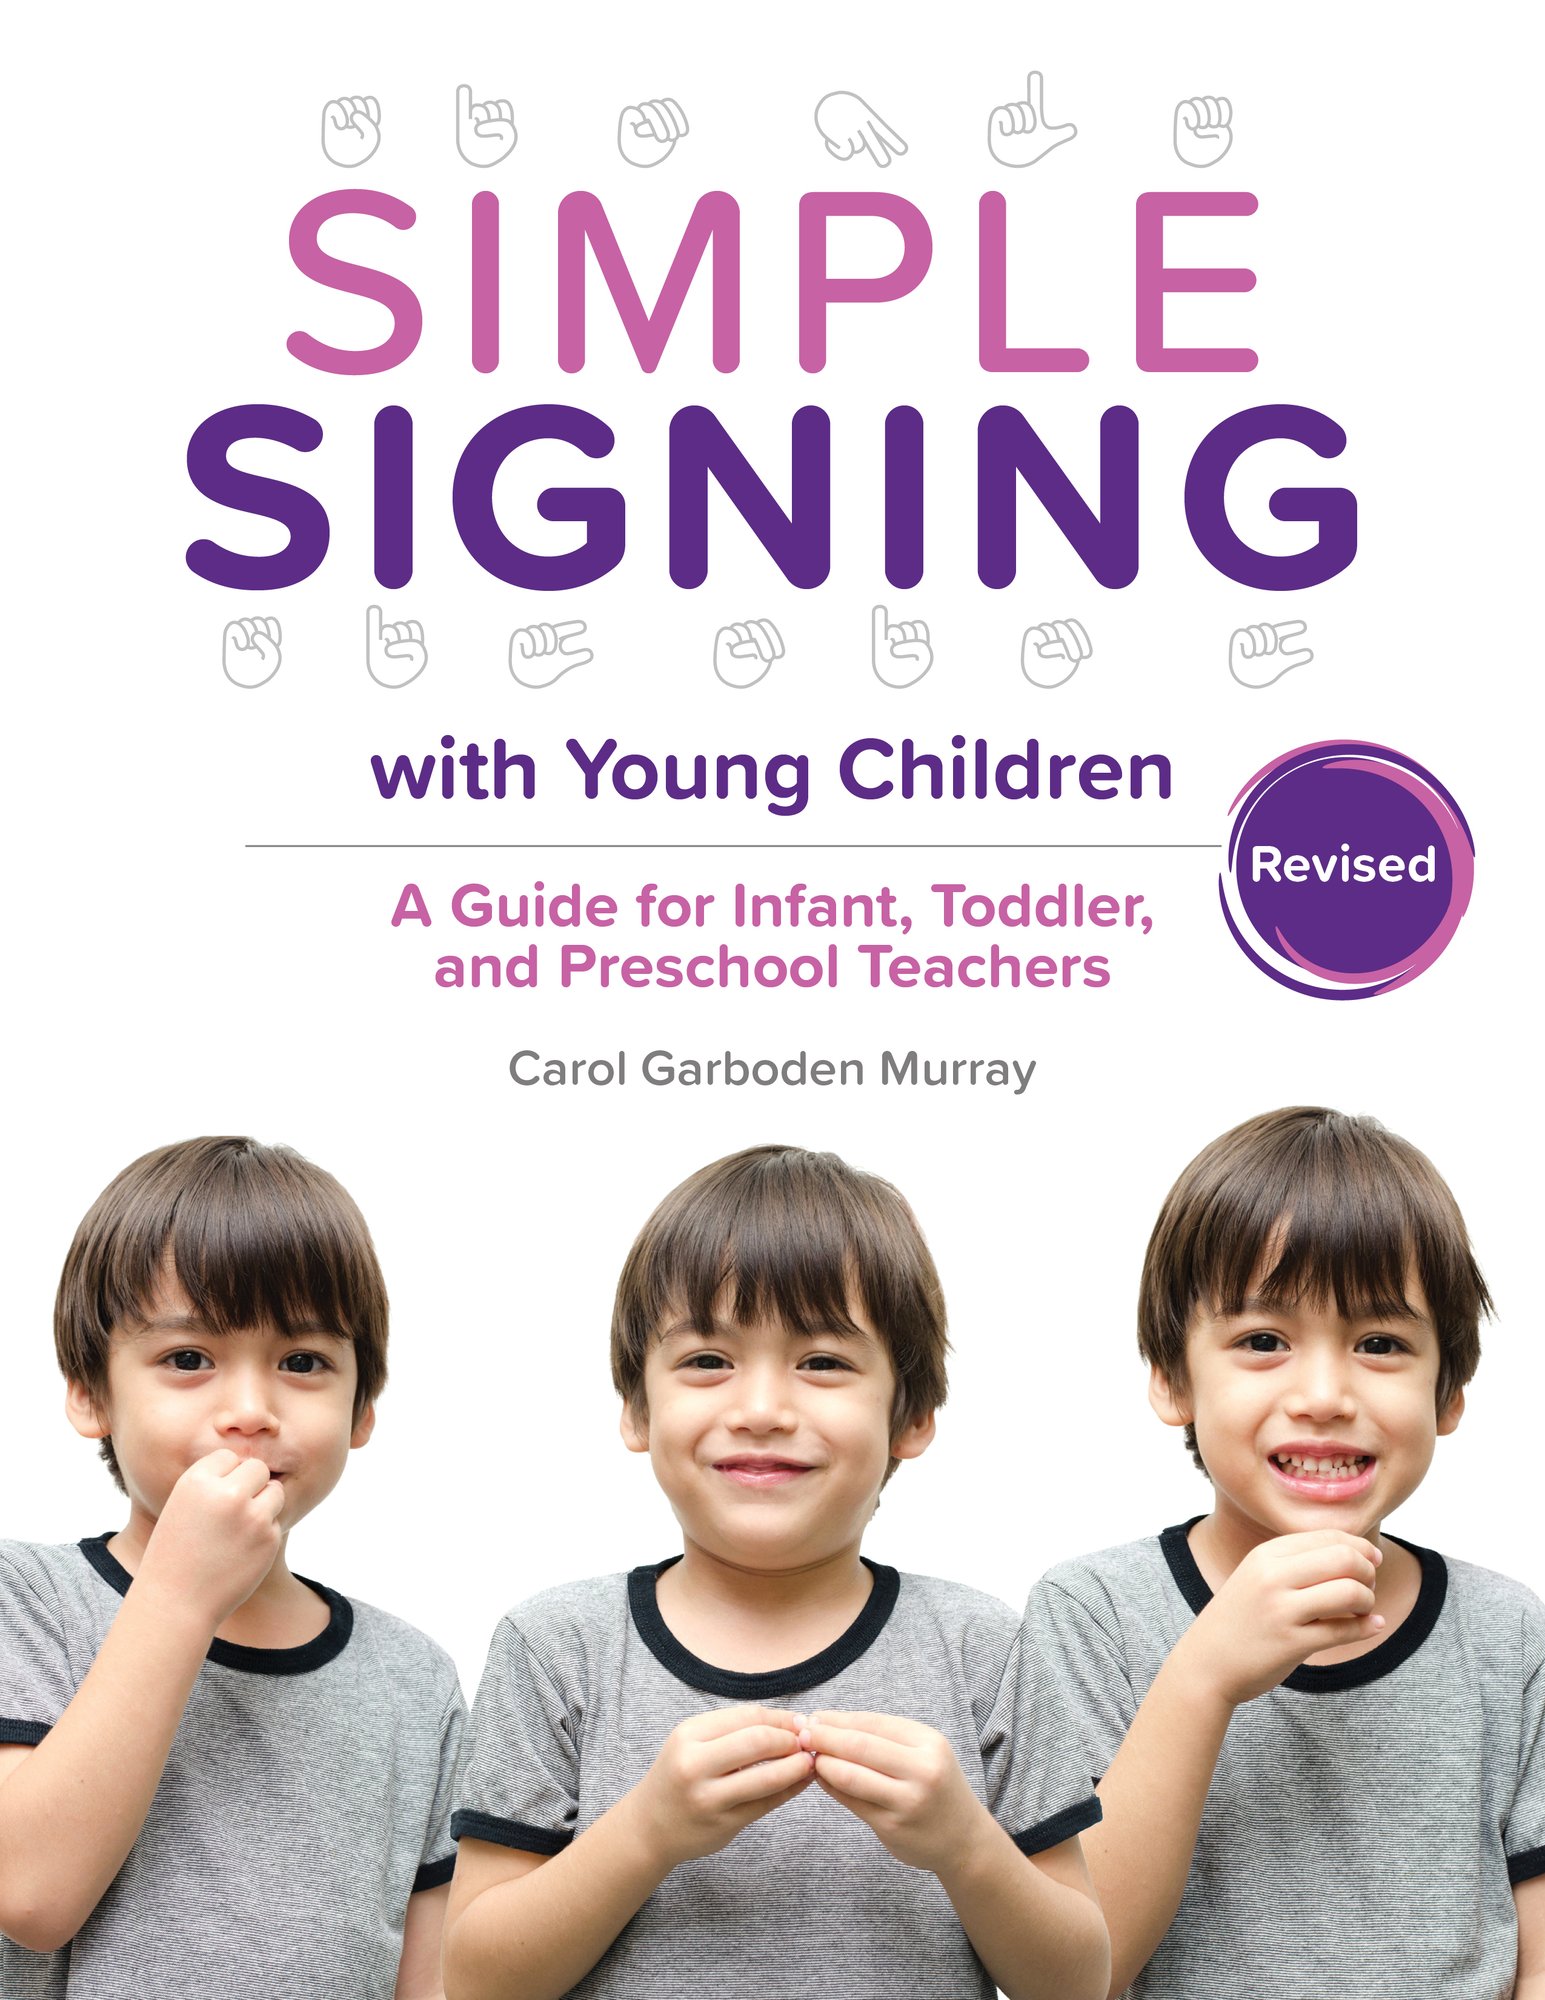 15950_SIMPLE_SIGNING_FRONT_COVER